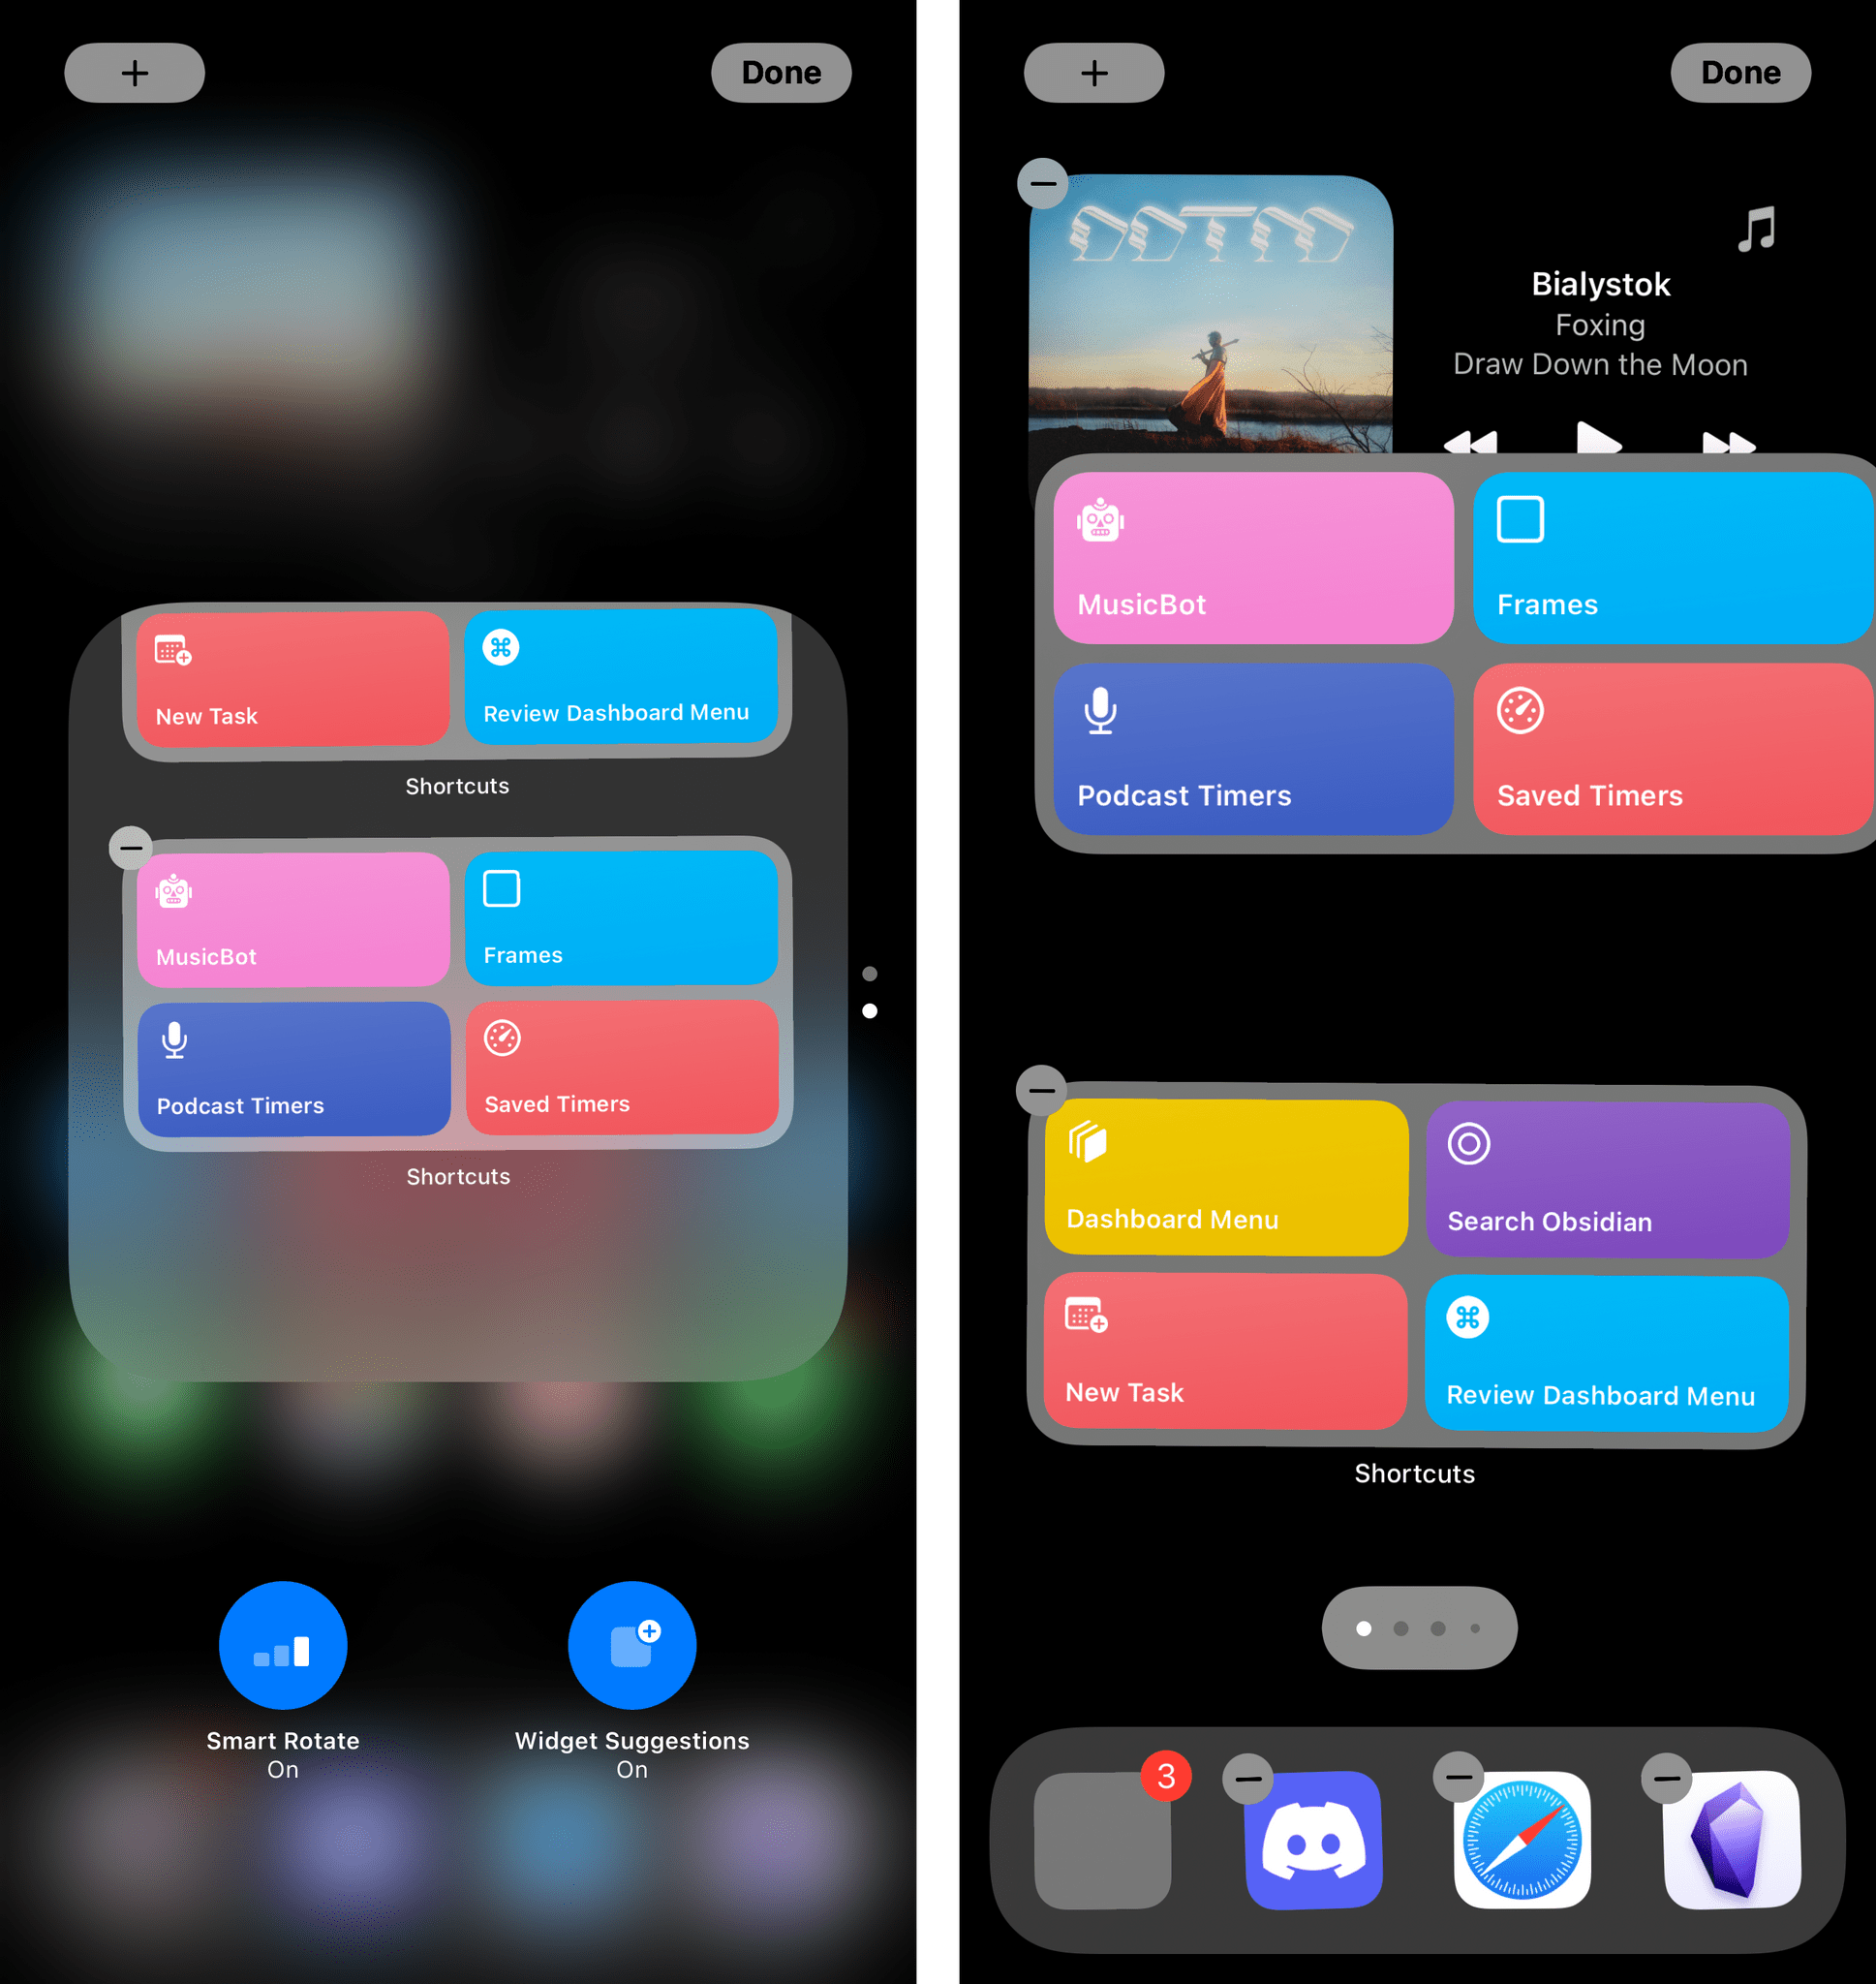 Stacks have a new editing UI, and you can now drag individual widgets out of stacks to put them back on the Home Screen.